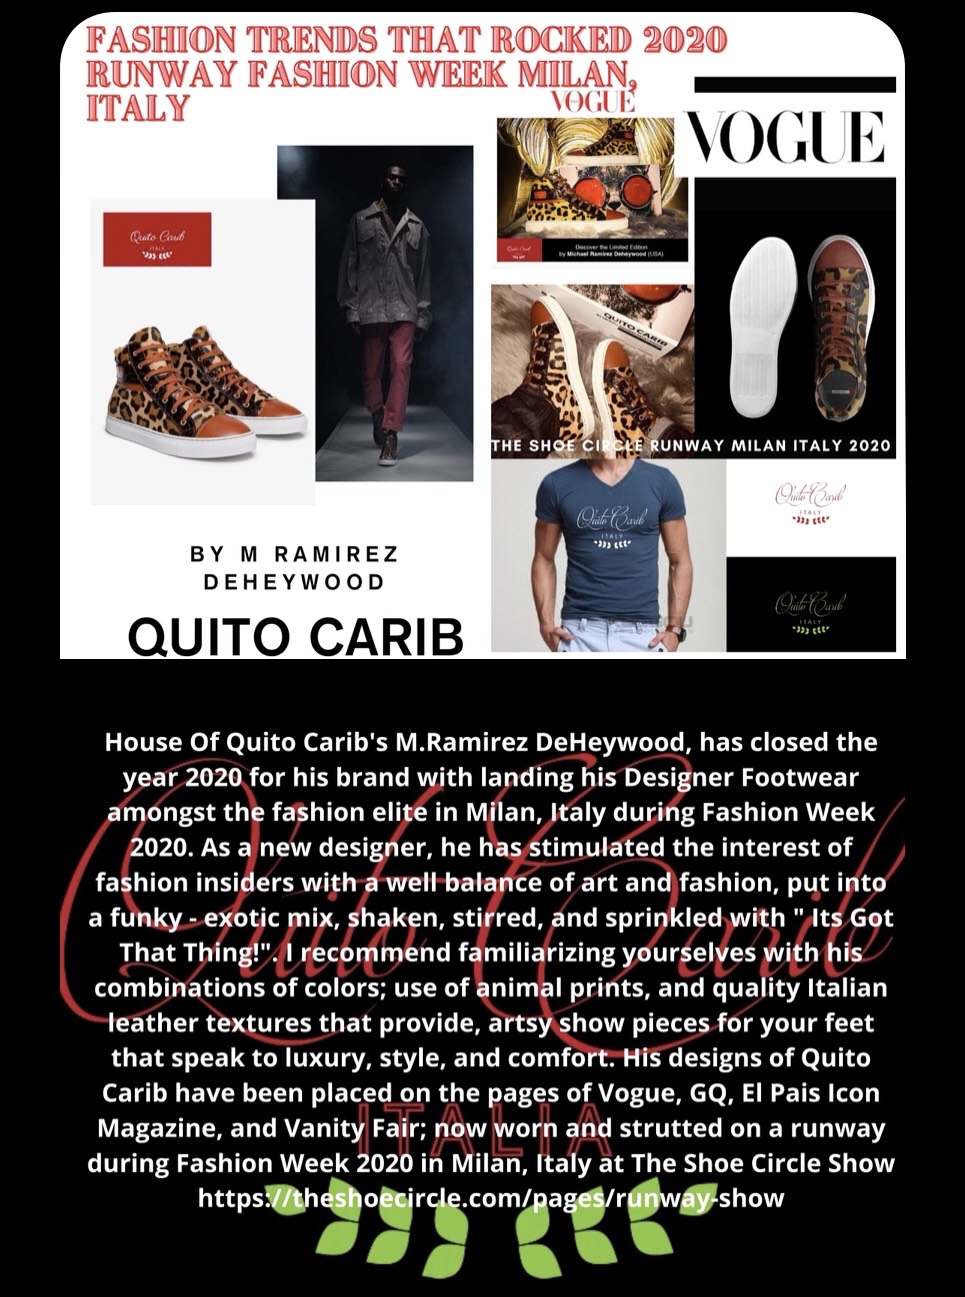 House Of Quito Carib Italian custom crafted shoe featured on Runway at Fashion Week Milan, Italy